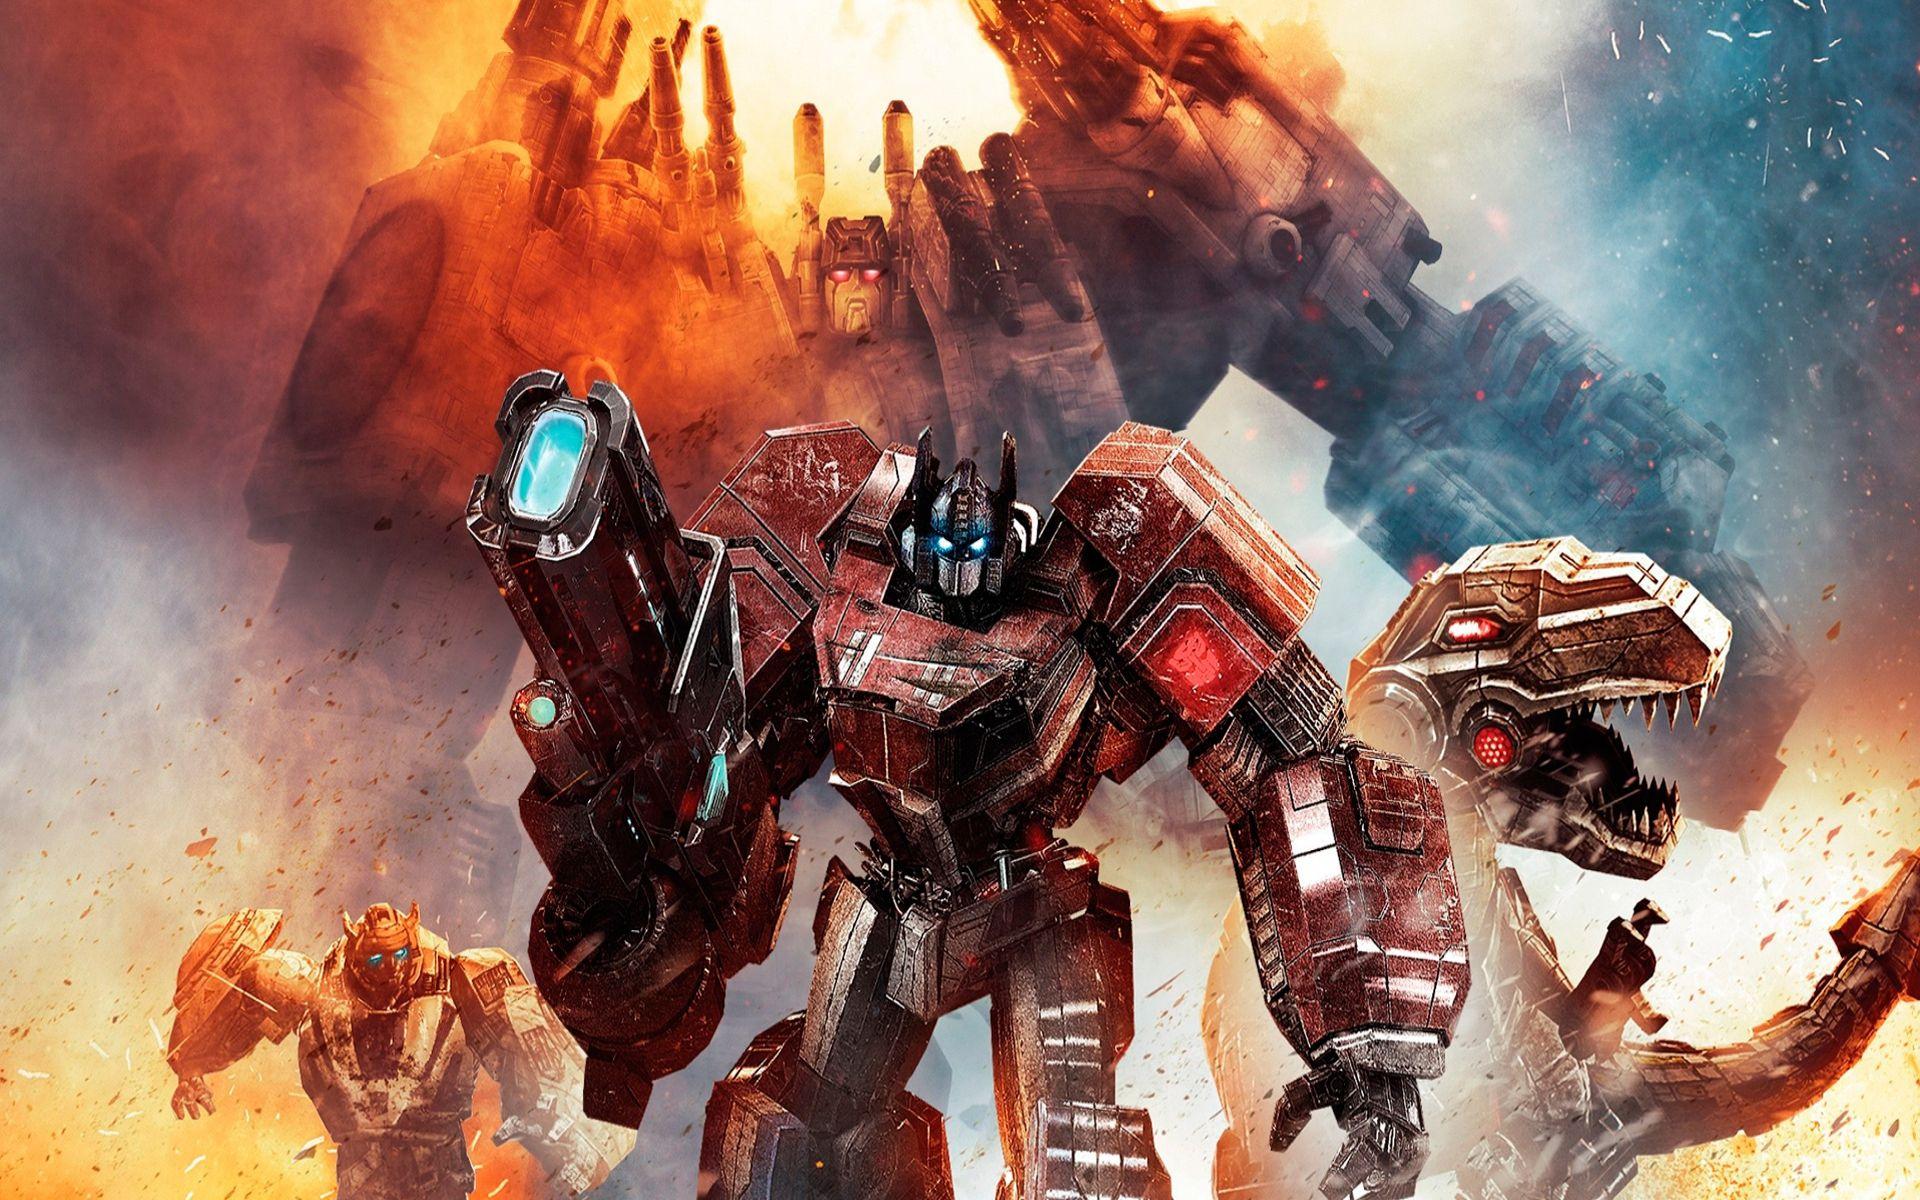 Who And What Are The Dinobots?